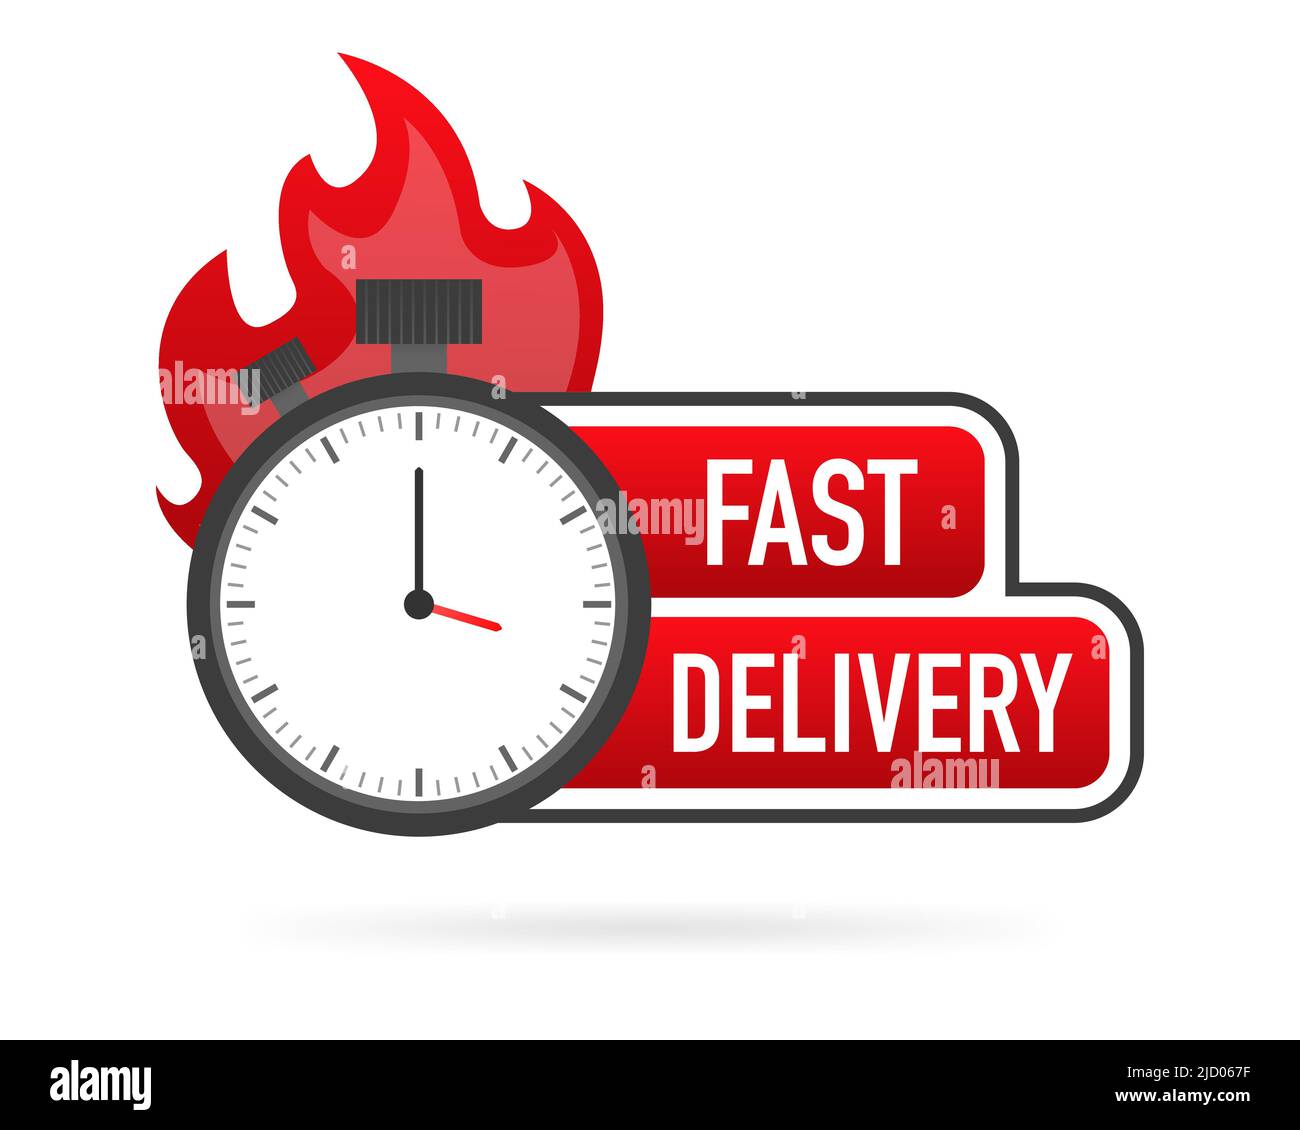 Fast delivery service badge. Fast time delivery order with stopwatch on white background. Vector illustration. Stock Vector